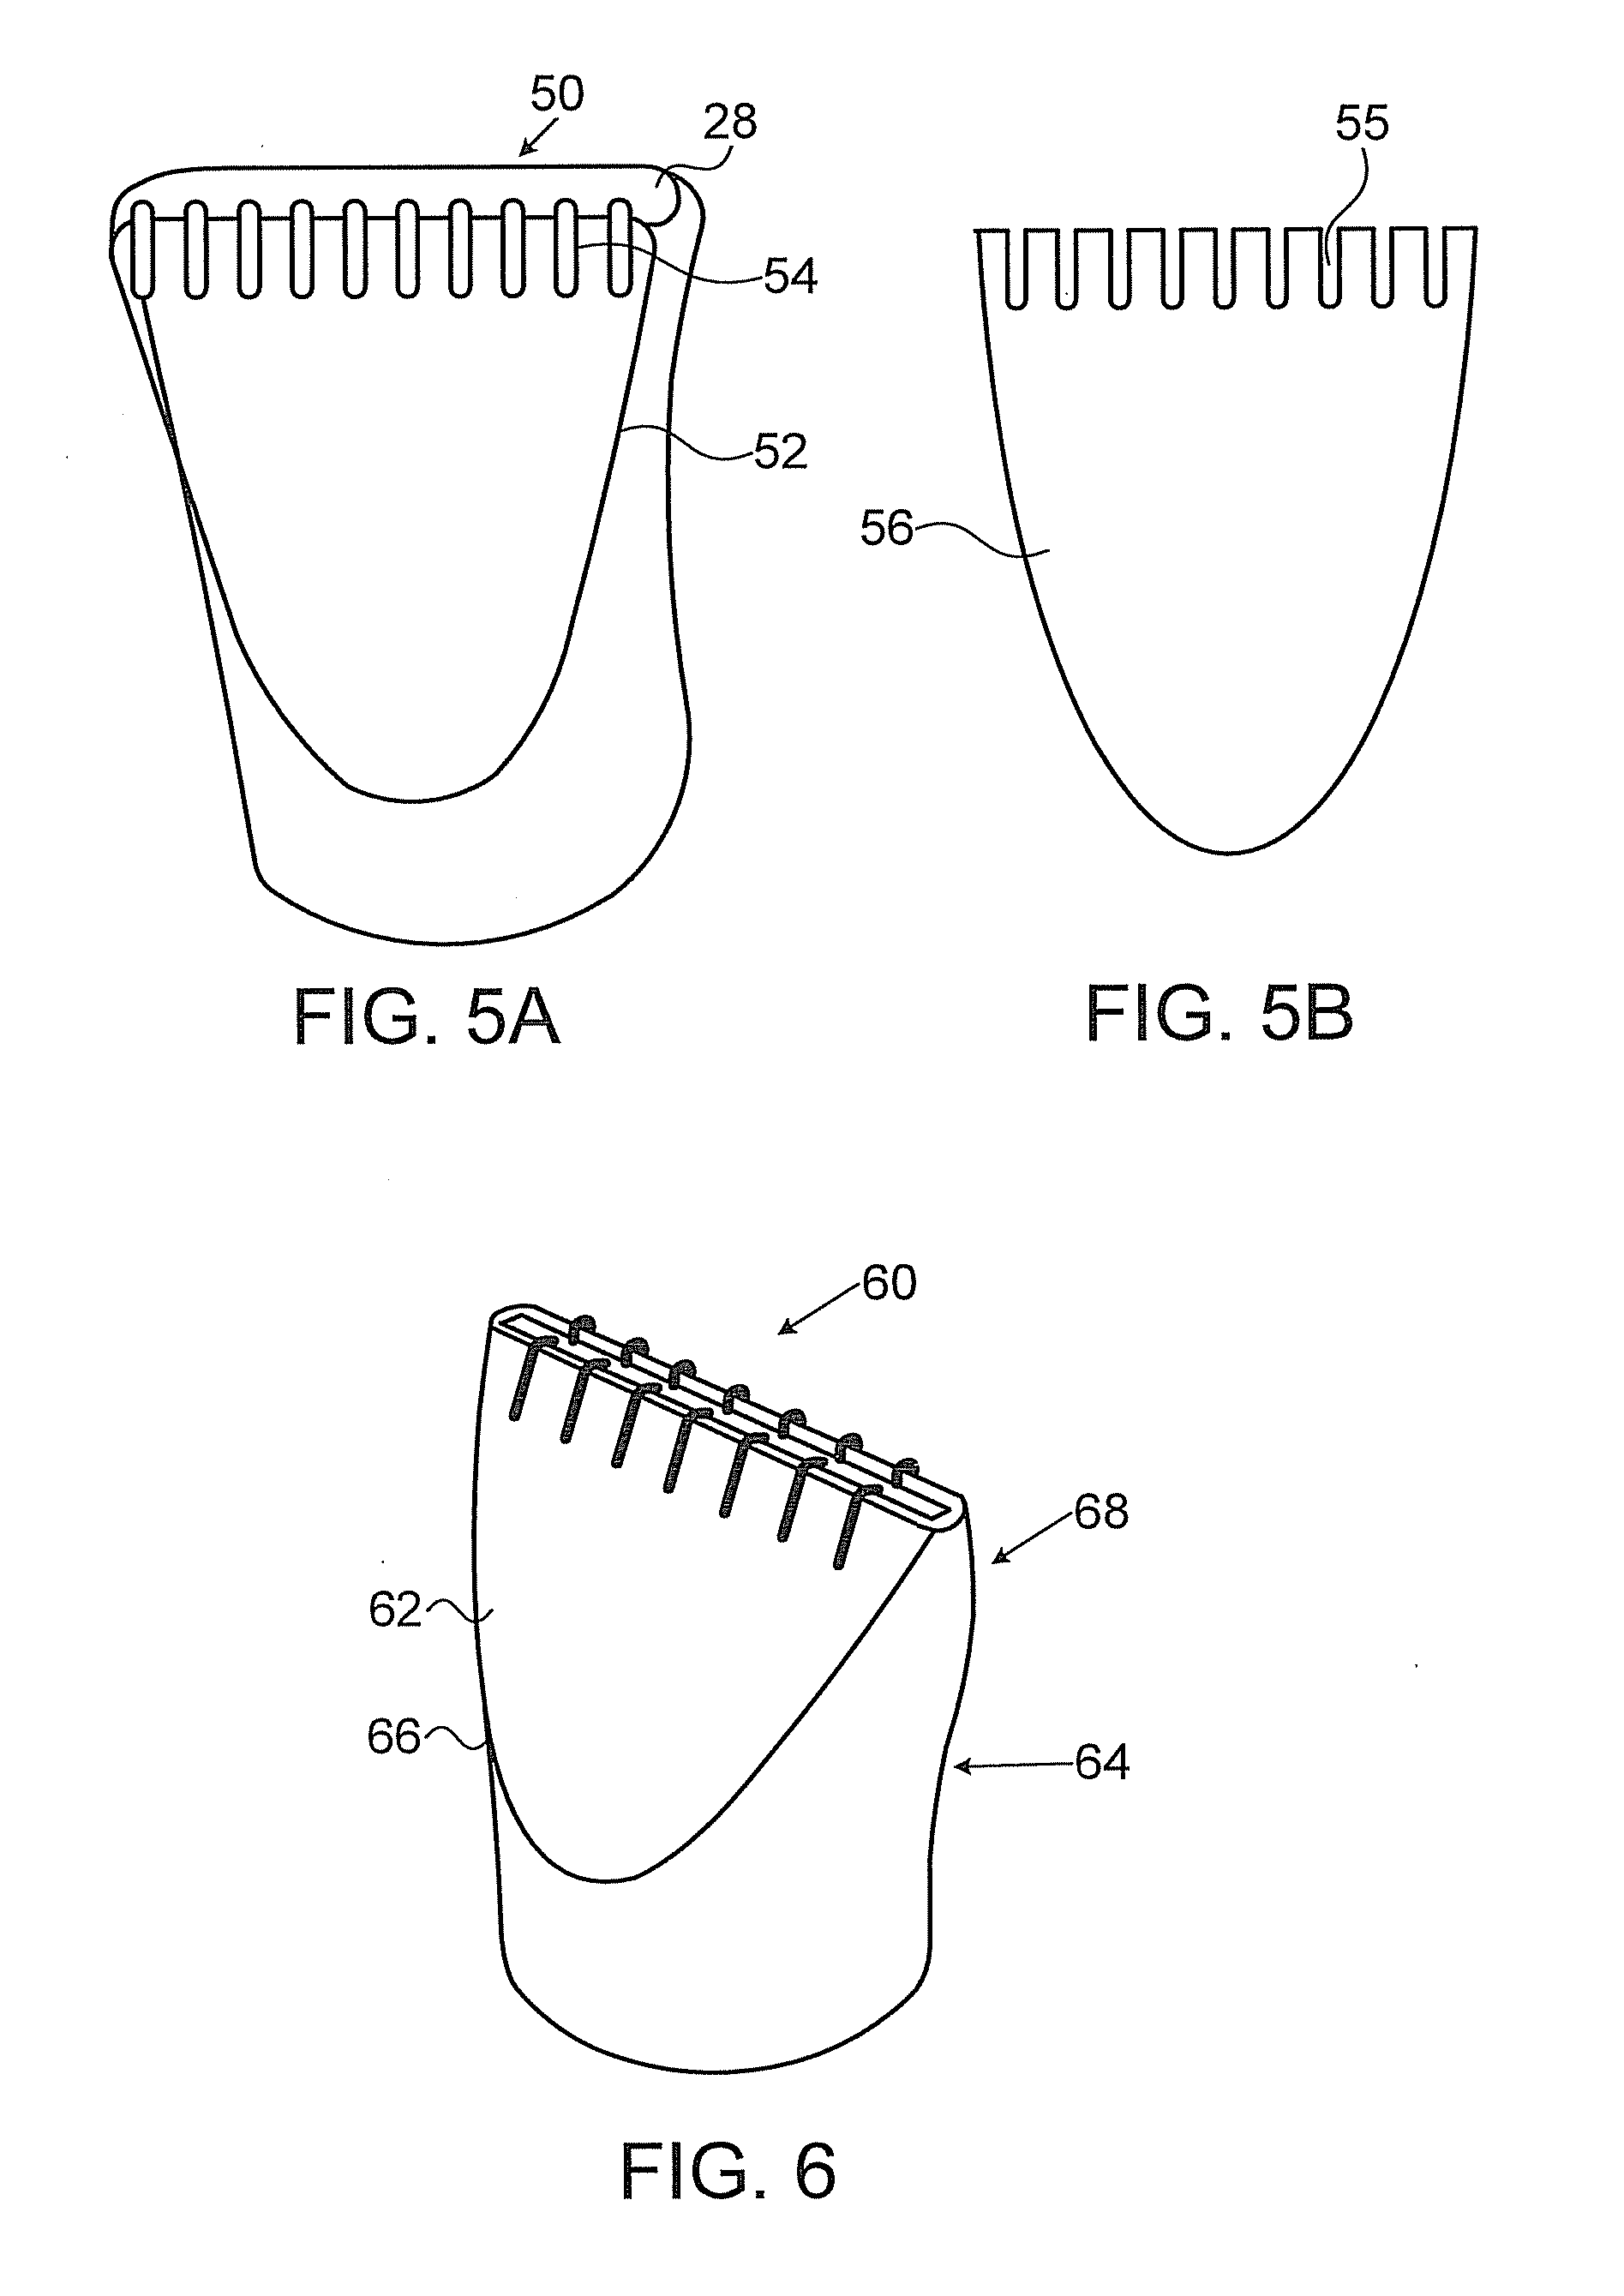 Hair styling attachment